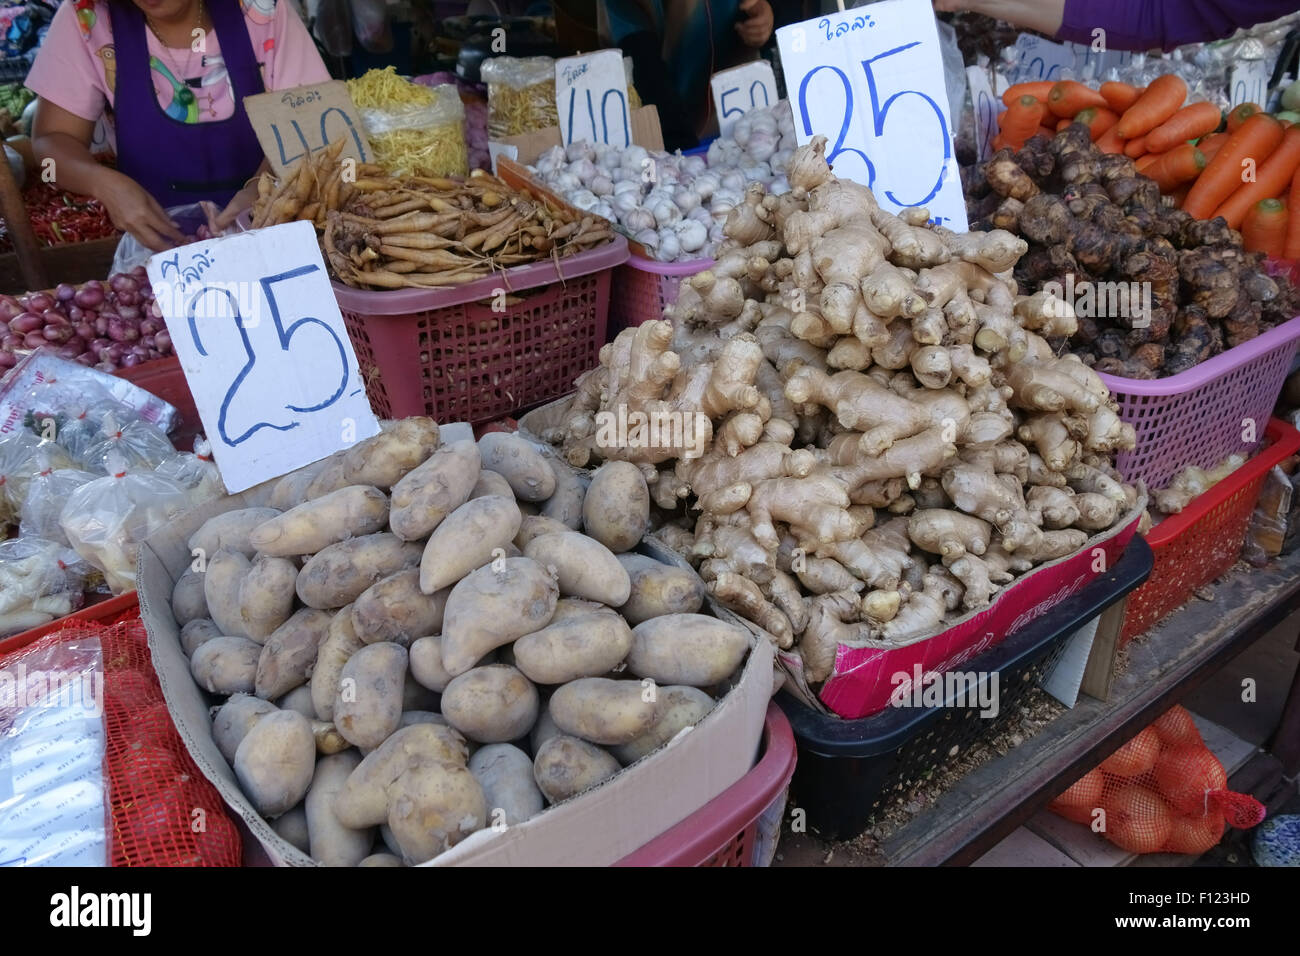 Root crops including potato, ginger, garlic, shallots, carrots and other produce on a stall in a Bangkok food market, Thailand Stock Photo